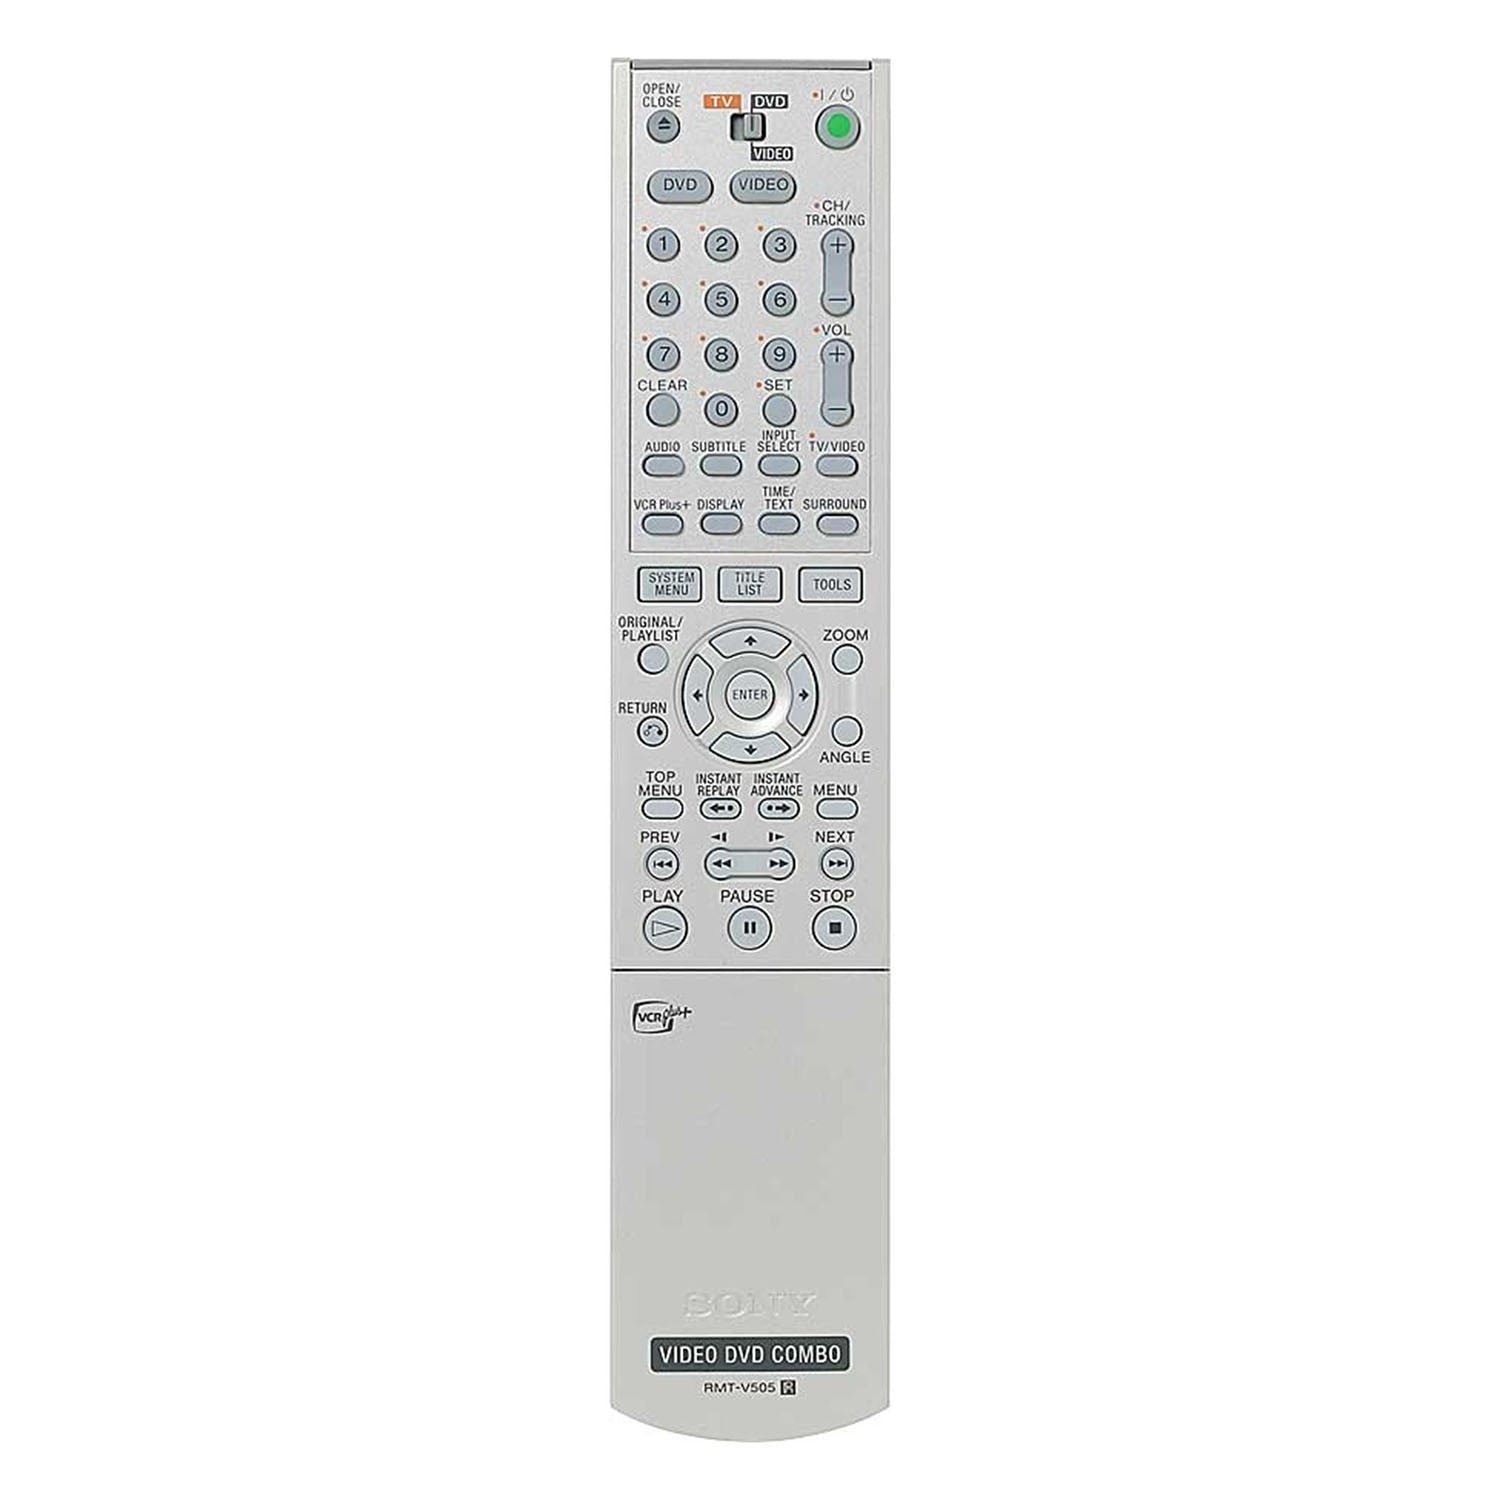 Sony RDR-VX500 VCR/DVD Recorder Combo - Remote Control